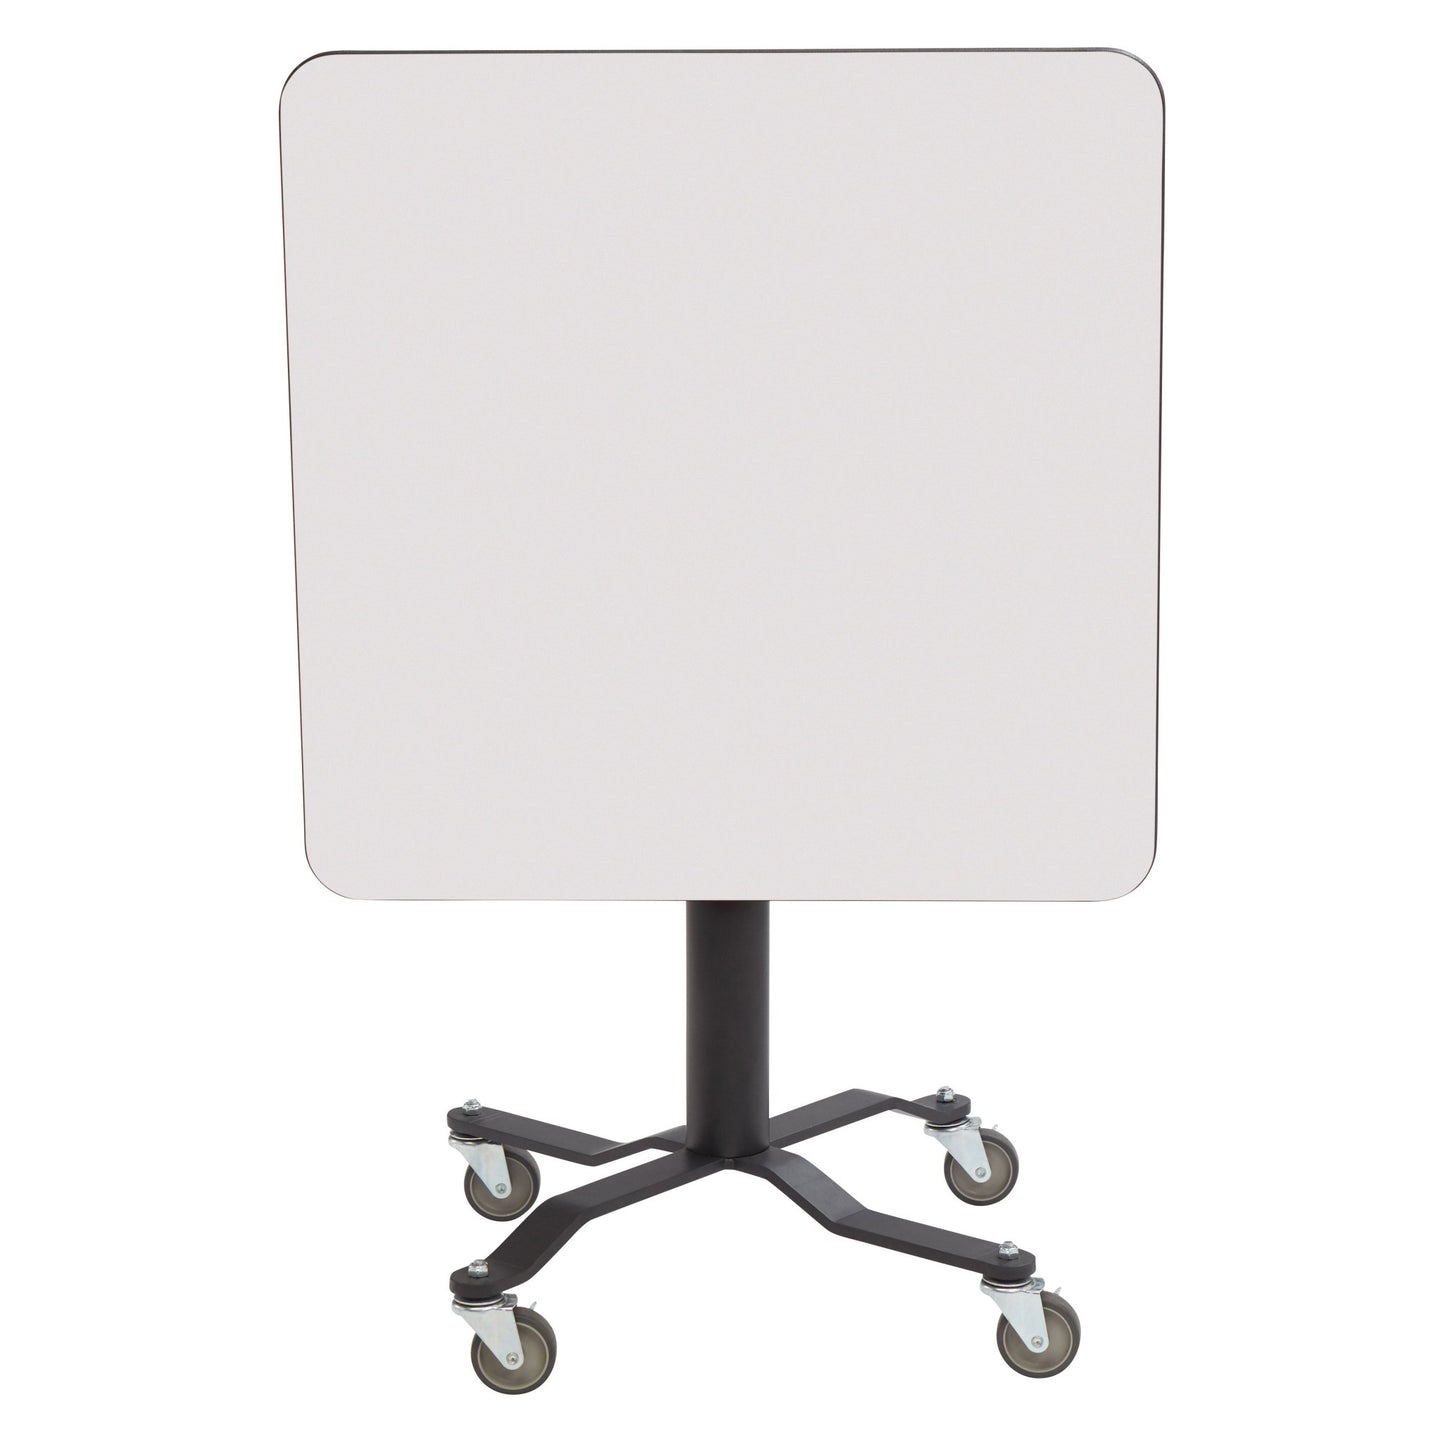 NPS Cafe Time II Table, 30" Square, Whiteboard Top, MDF Core, Protect Edge (NationalPublic Seating NPS-PCT330MDPEWB) - SchoolOutlet